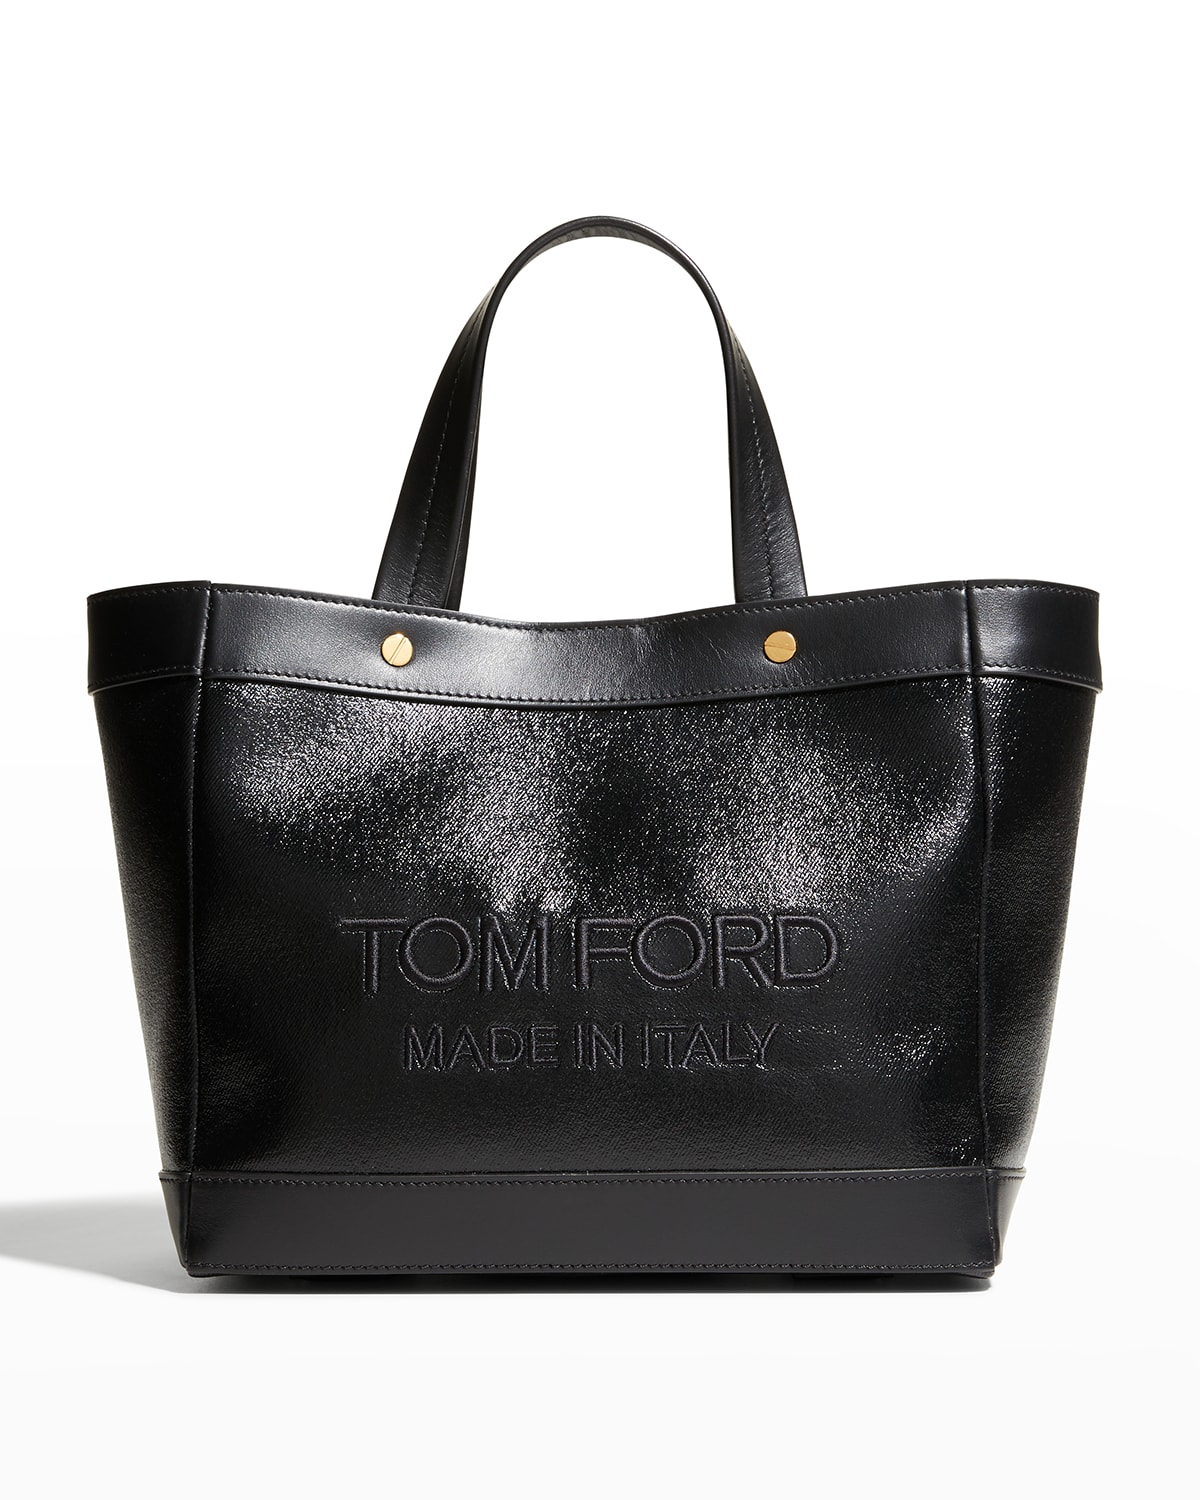 Tom Ford Tote Bag | Neiman Marcus